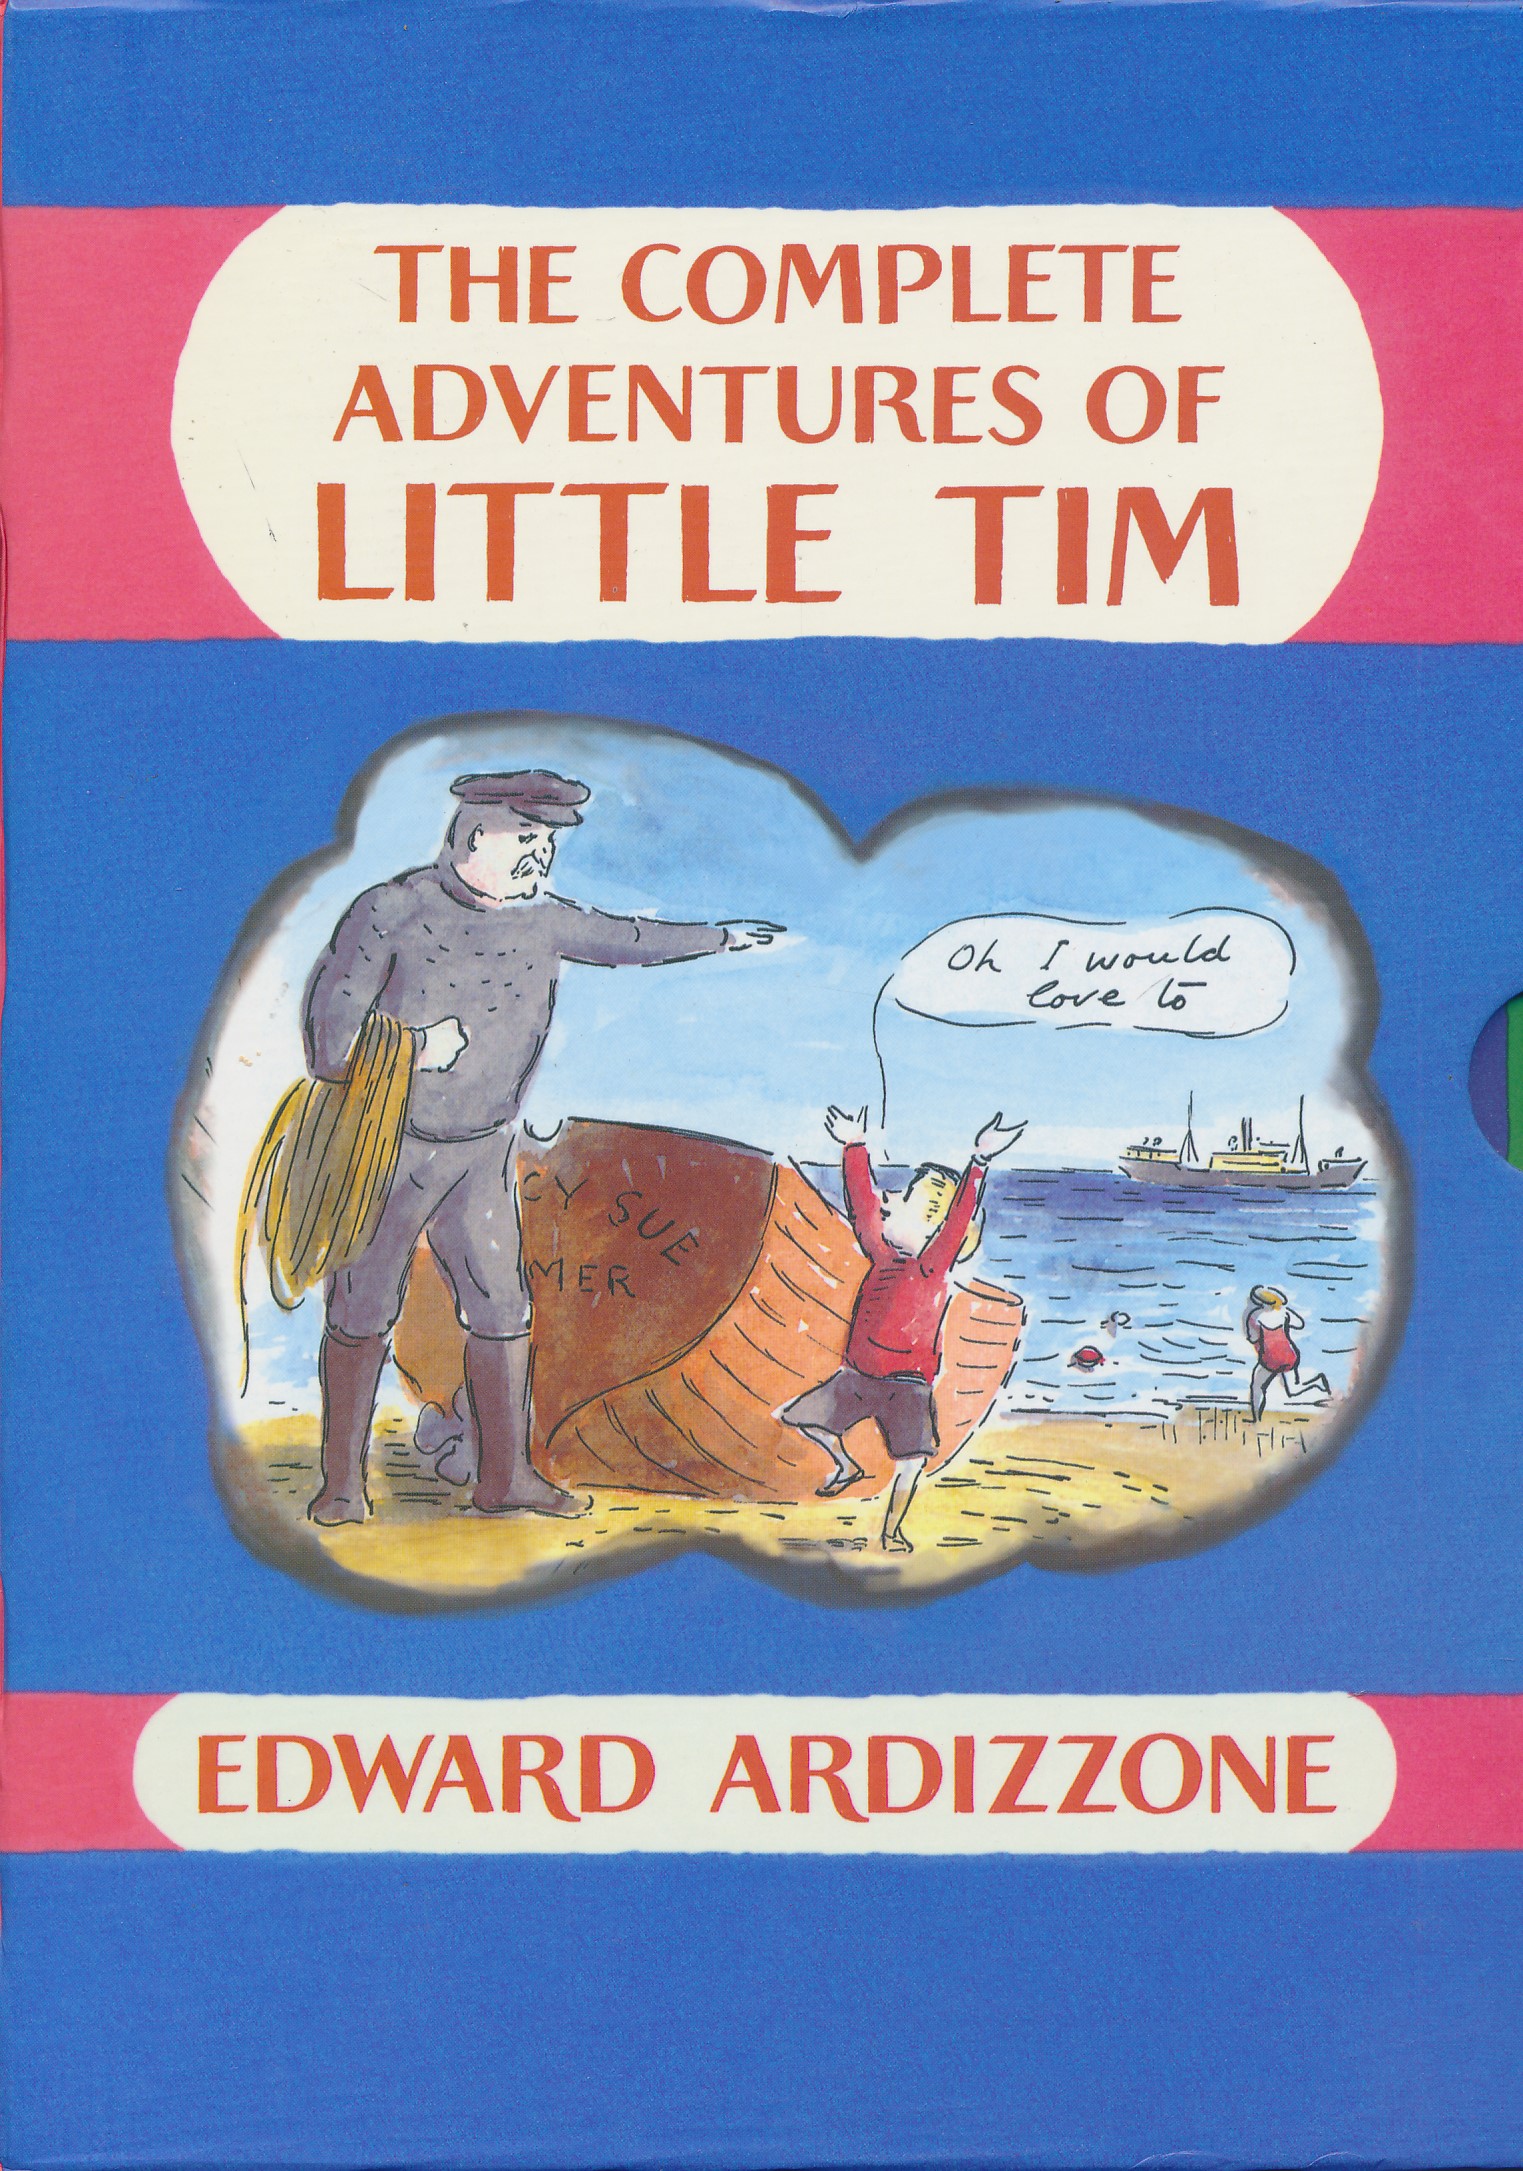 The Complete Adventures of Little Tim. Eleven volume boxed set.